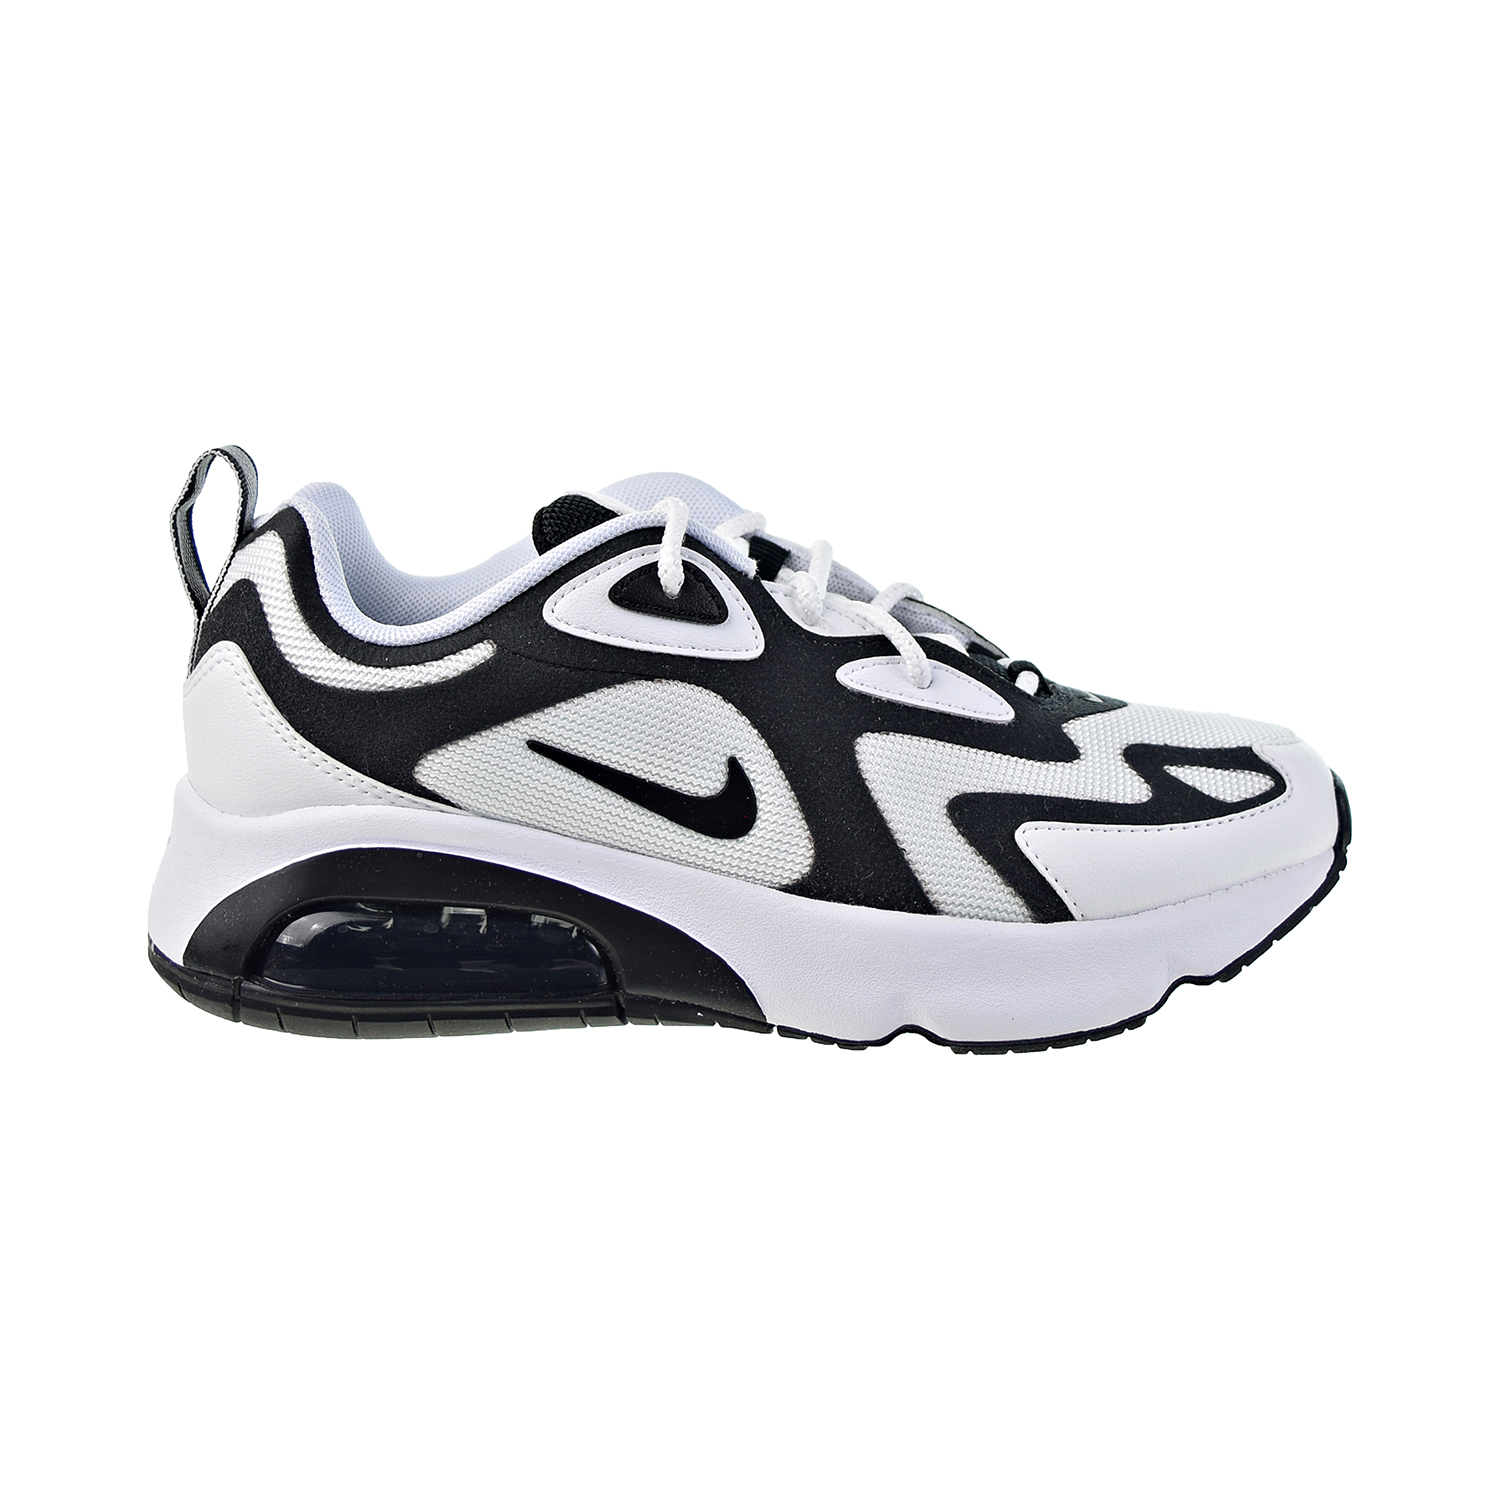 Nike Air Max 200 Womens Shoes Size 6, Color: White/Black/Anthracite - image 1 of 6